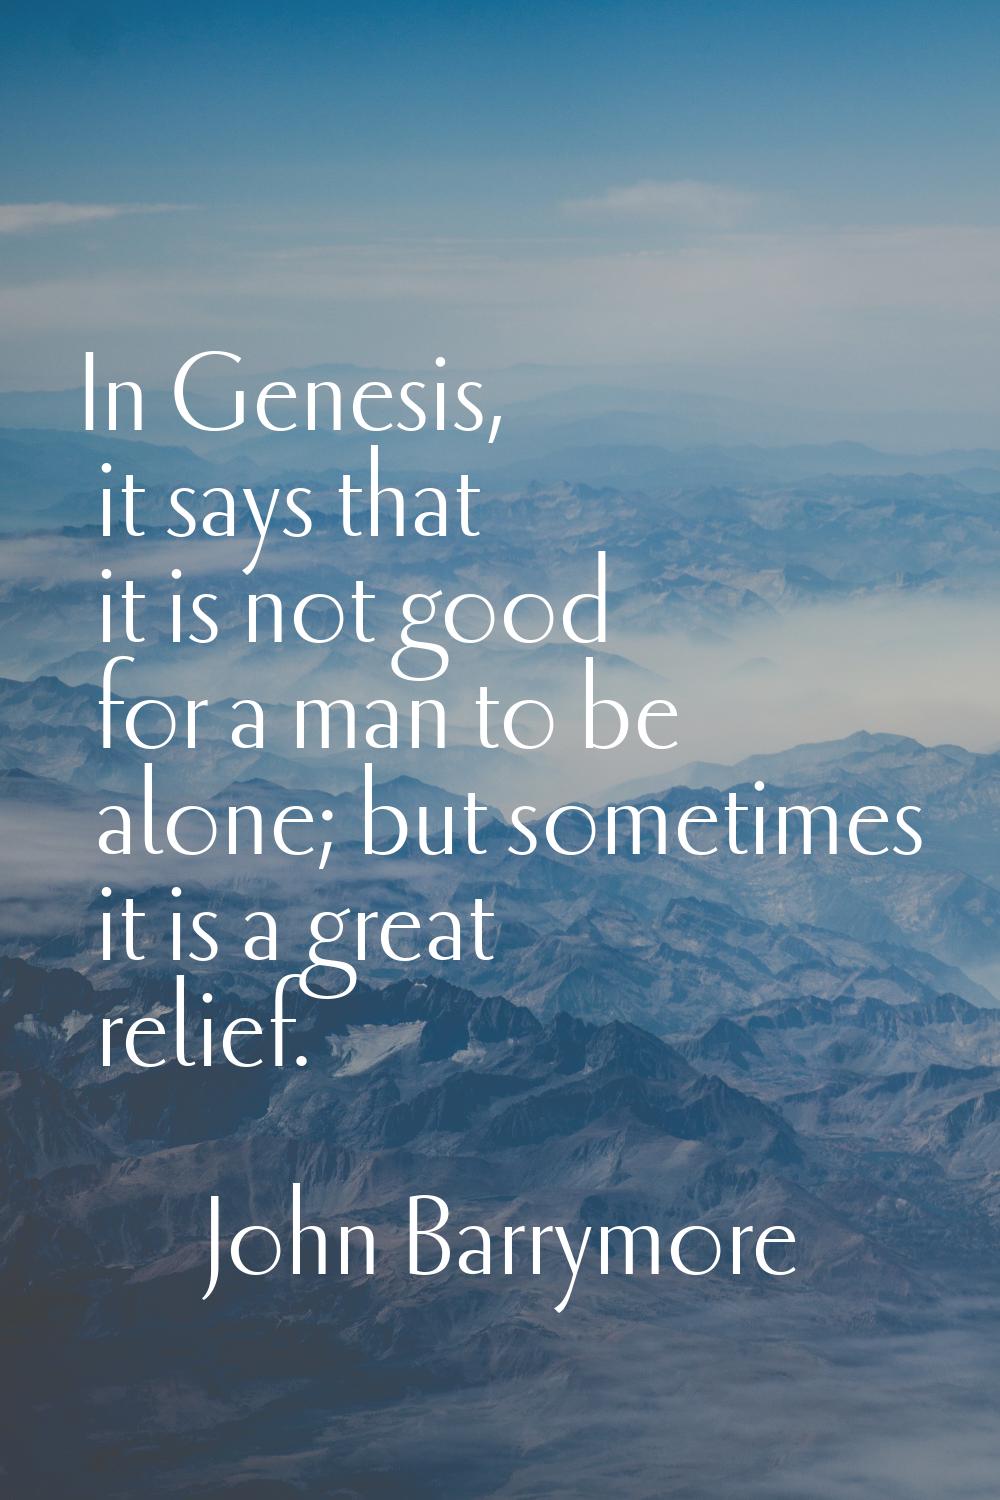 In Genesis, it says that it is not good for a man to be alone; but sometimes it is a great relief.